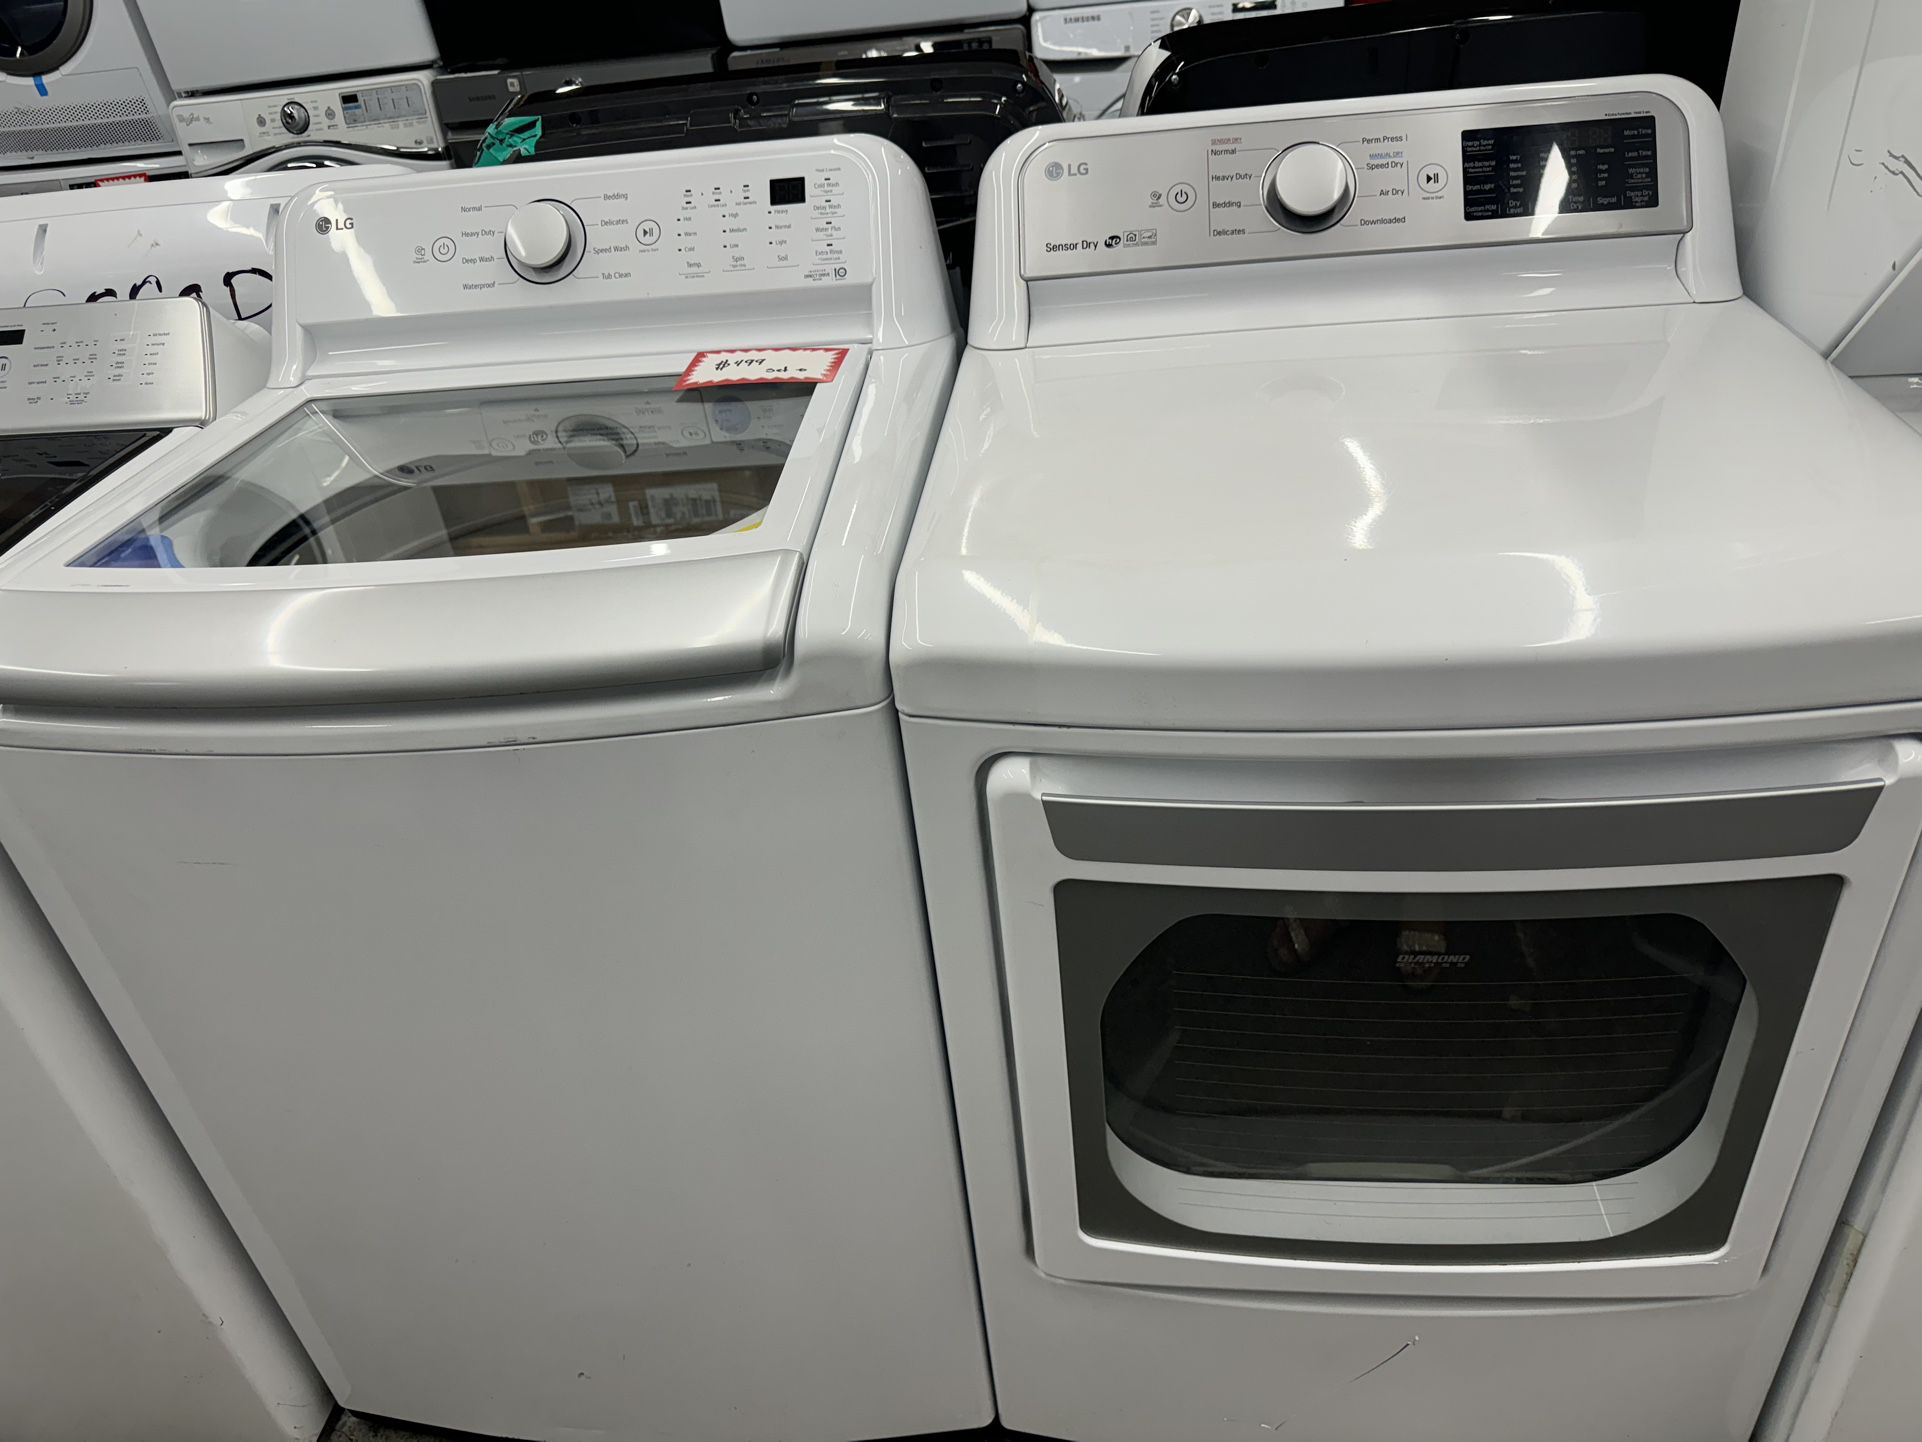 LG Washer And Electric Dryer 4 Months Warranty We Are Located In The Blue Building🟦